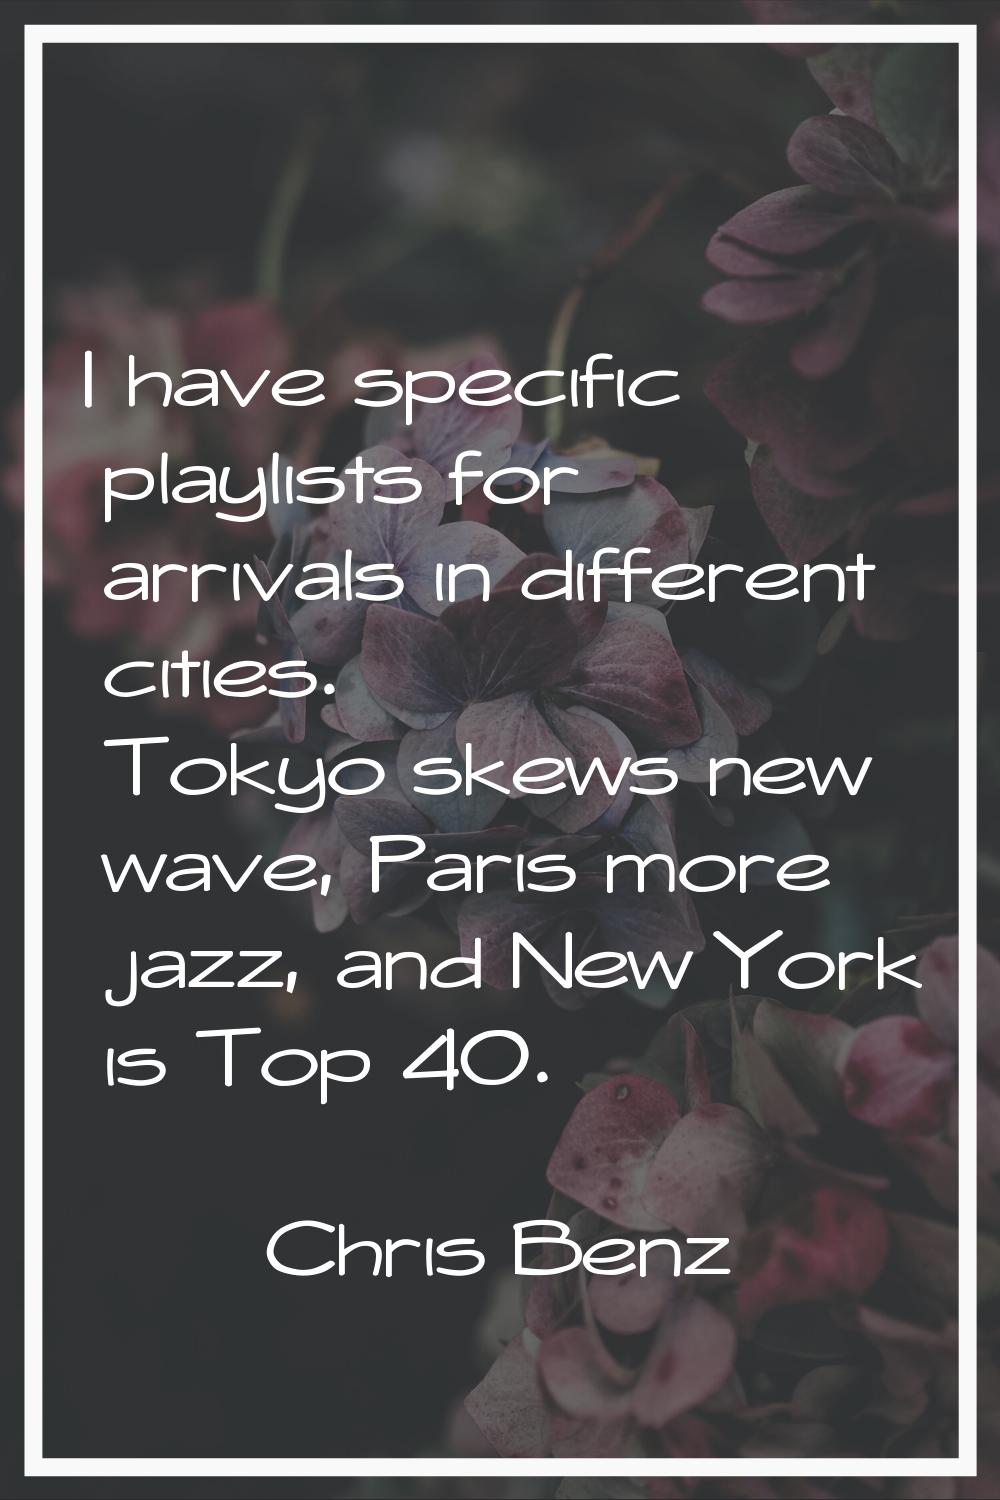 I have specific playlists for arrivals in different cities. Tokyo skews new wave, Paris more jazz, 